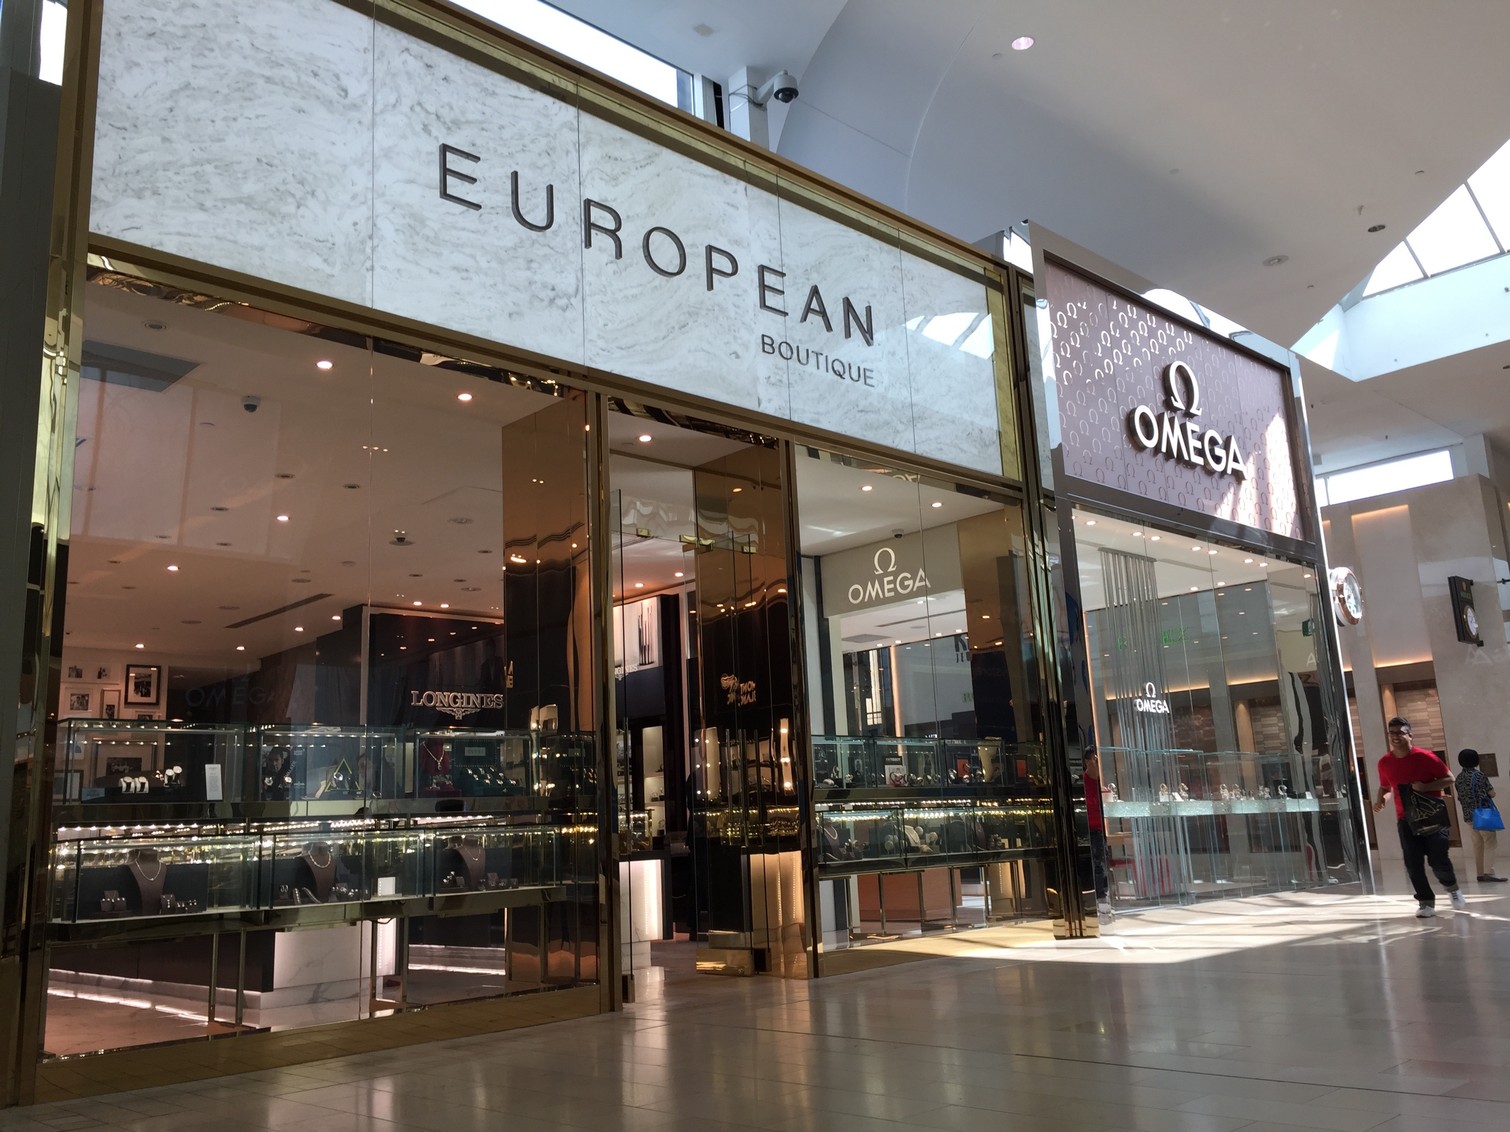 European Boutique Yorkdale Mall